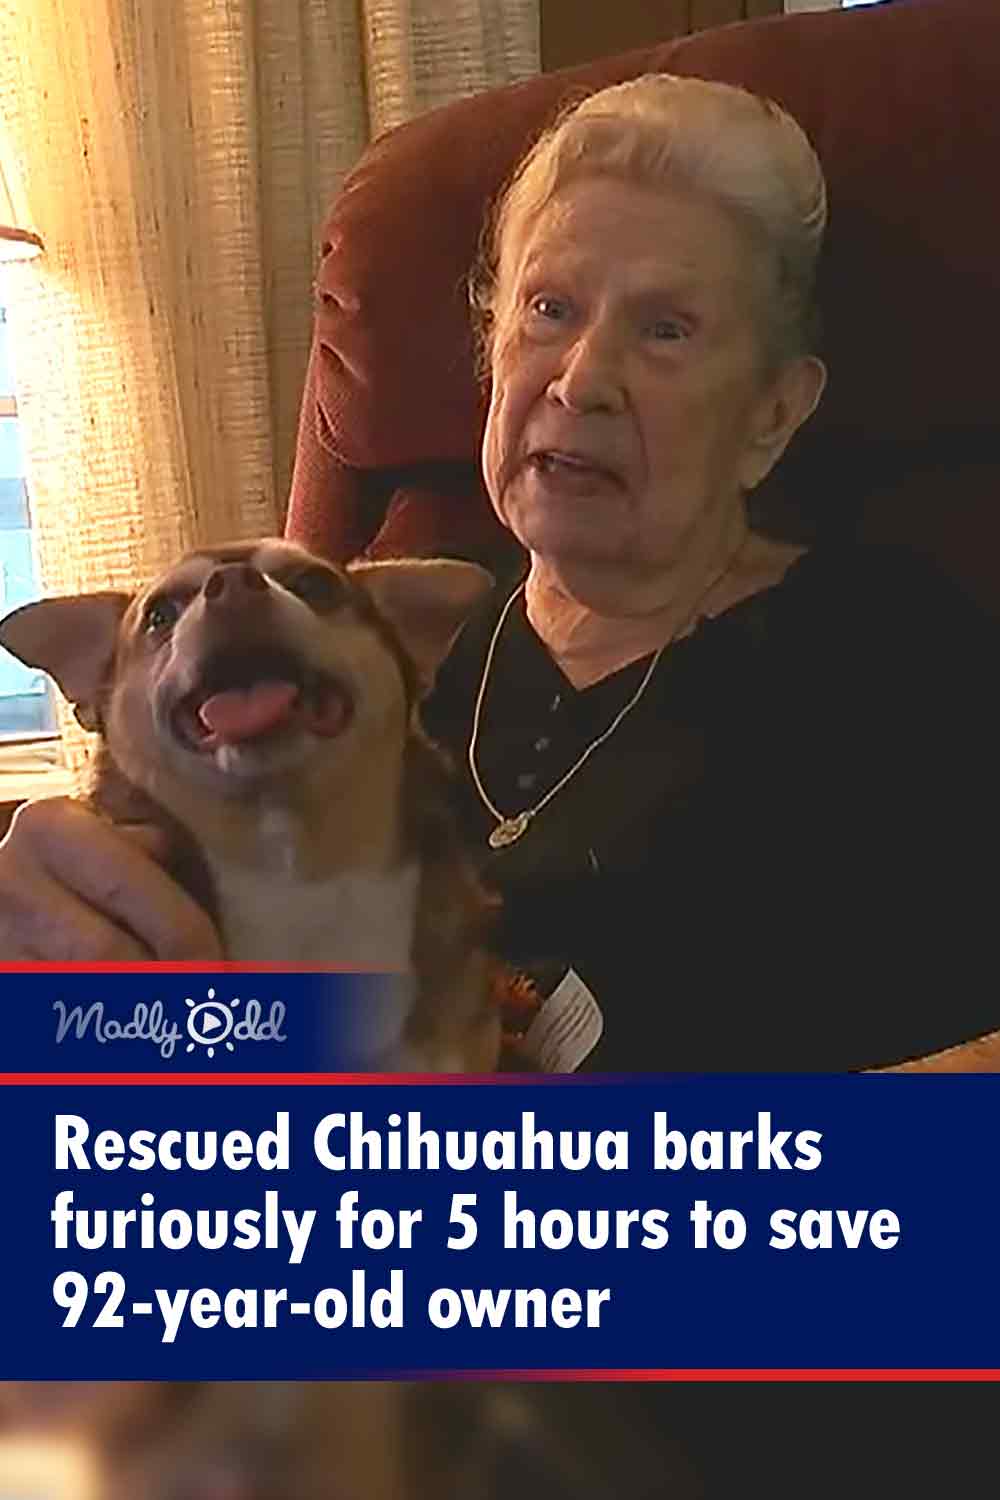 Rescued Chihuahua barks furiously for 5 hours to save 92-year-old owner